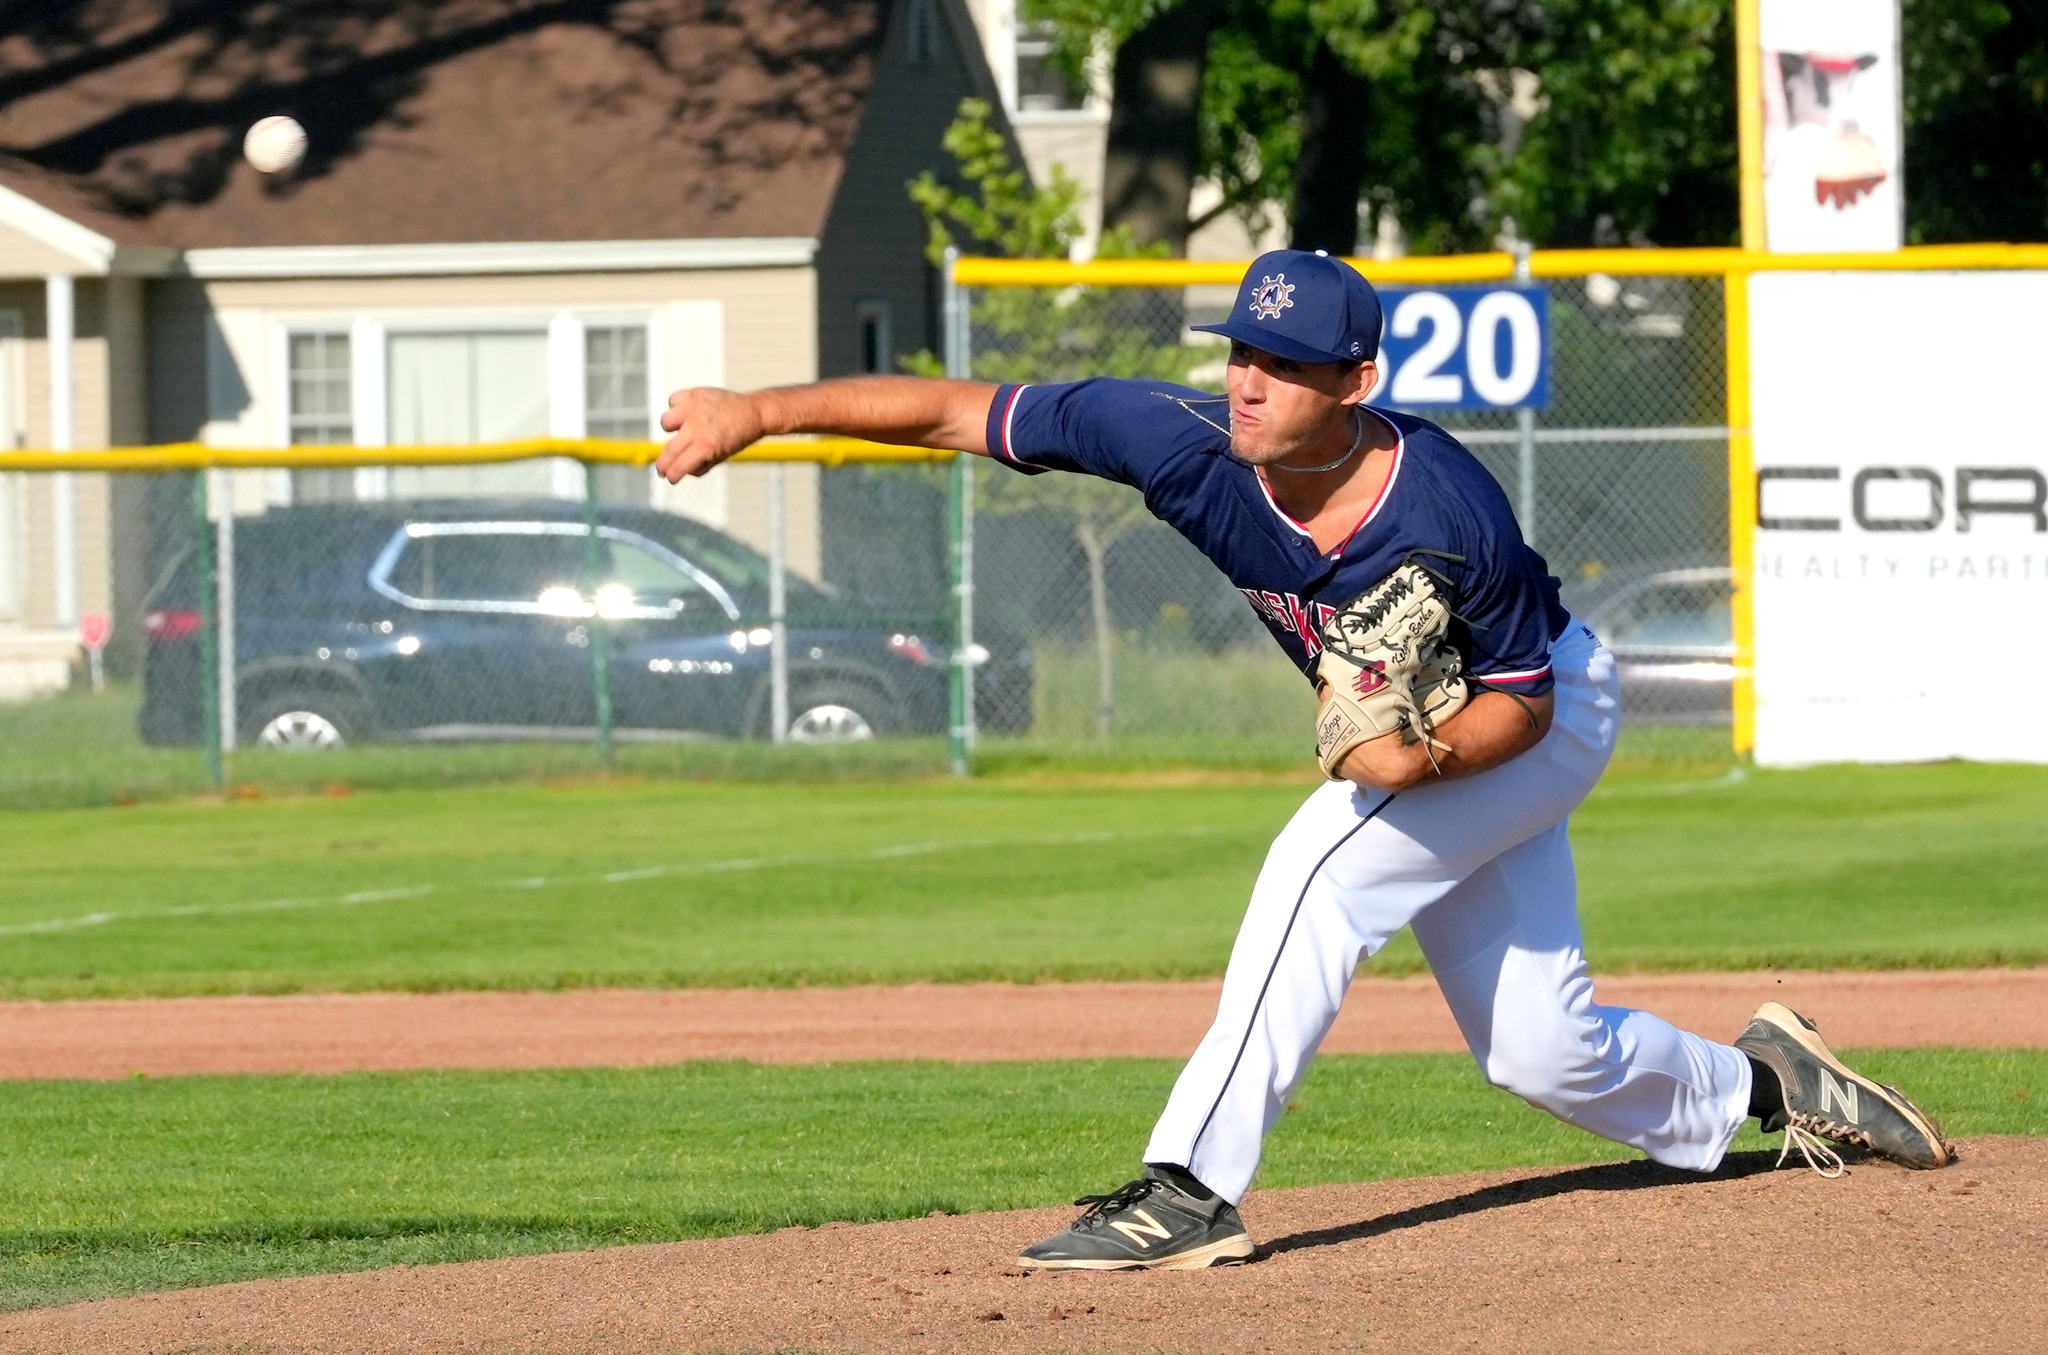 Muskegon Clippers pitchers struggle in relief, fall to visiting Southern Ohio